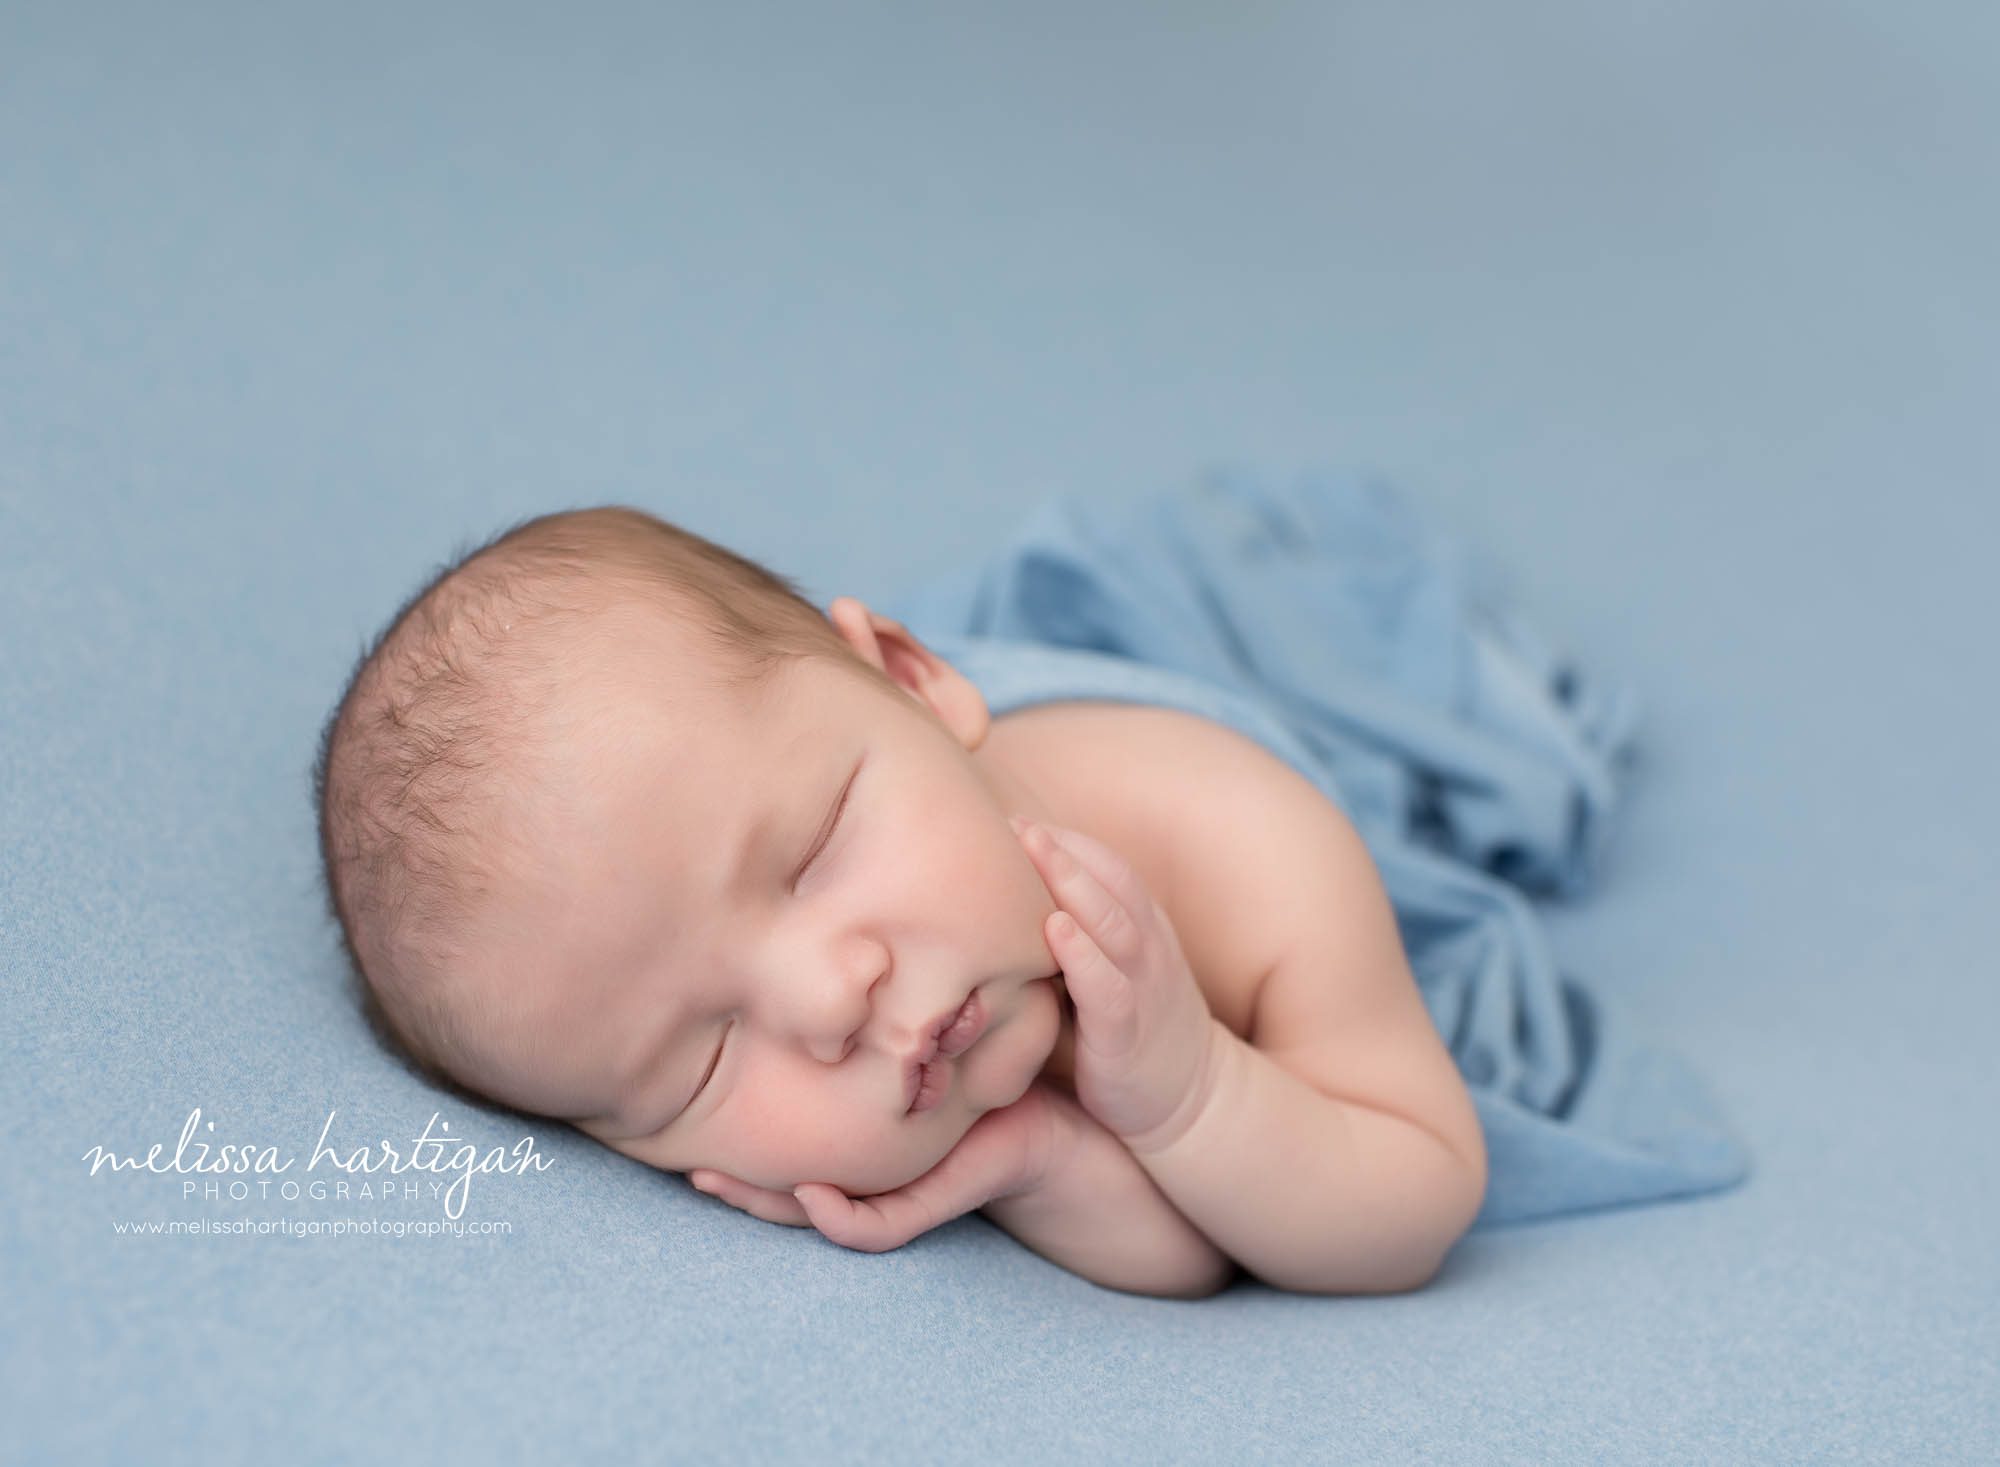 newborn baby boy posed on blue backdrop in timber pose newborn photography CT